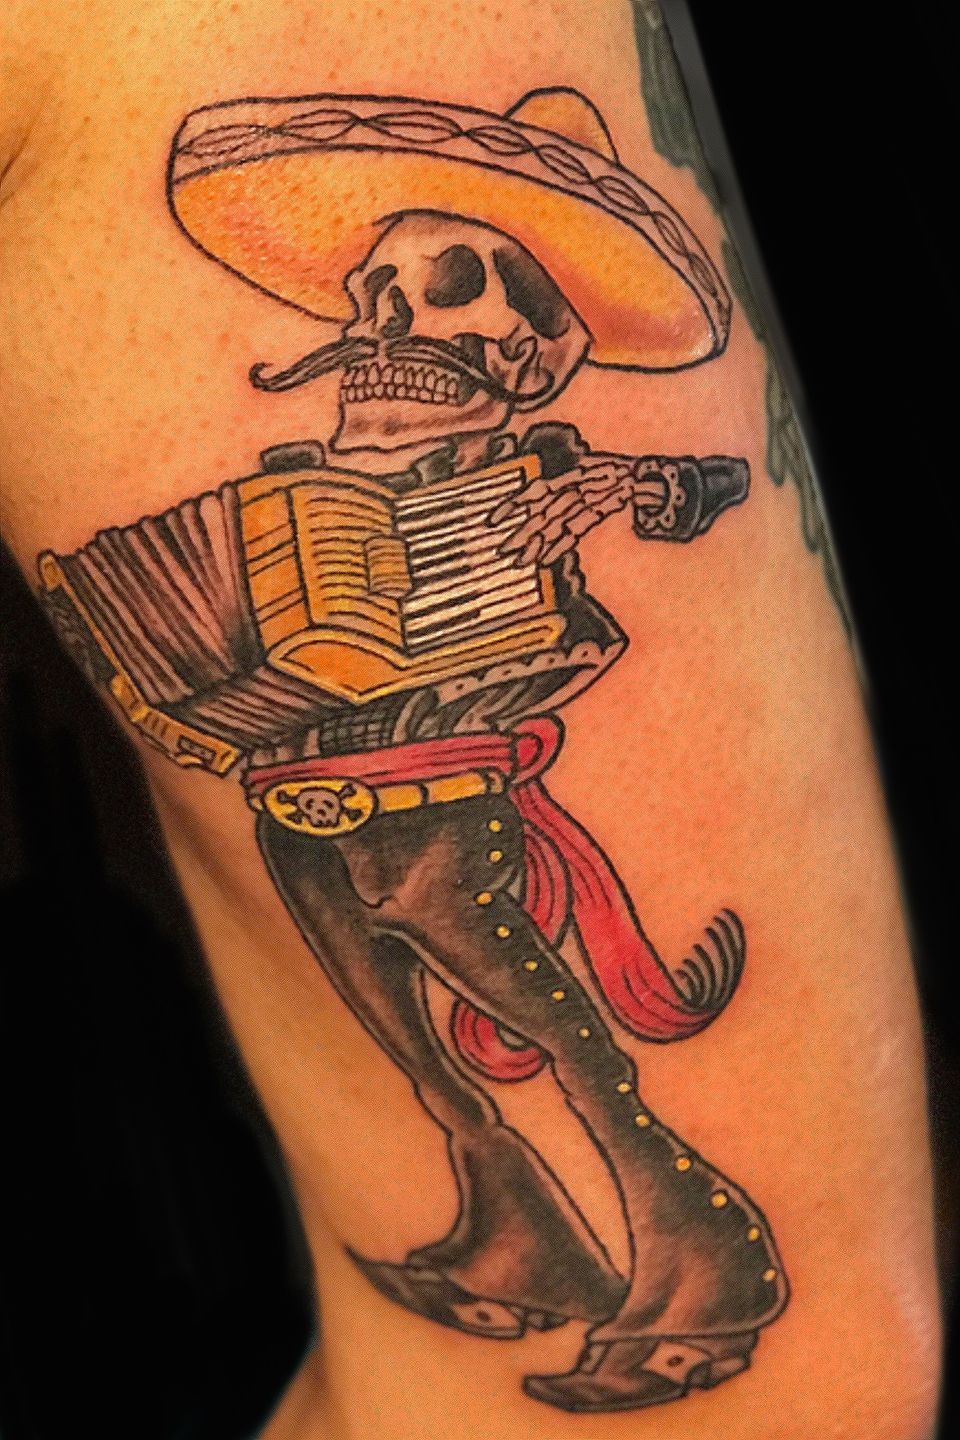 Mariachi tattoo located on the upper arm sketch work